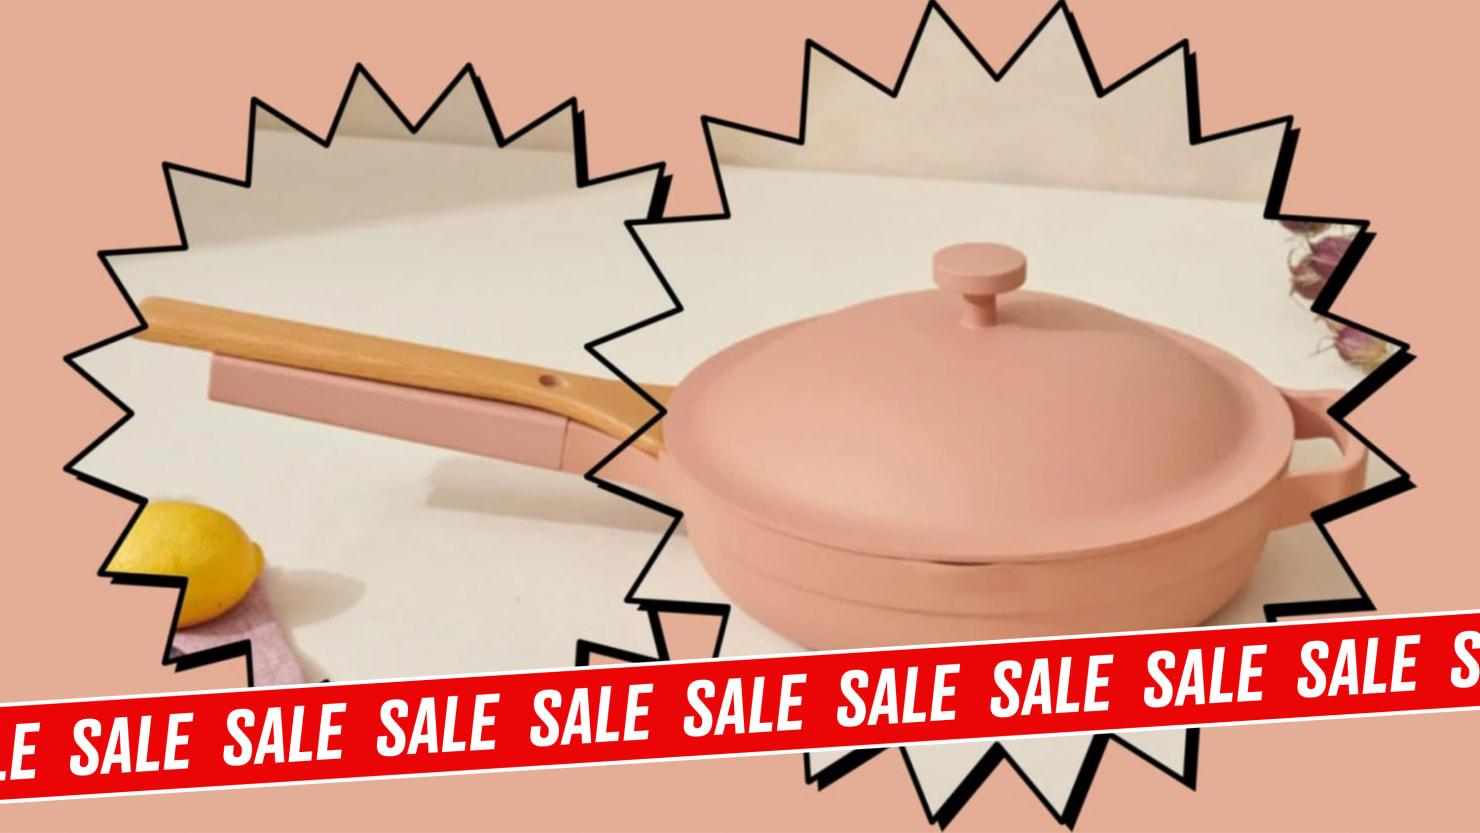 Our Place's Epic Black Friday Sale Is On and It Includes the Always Pan,  Plus Their New Air Fryer Oven, Multicooker, and Meal-Prep Set